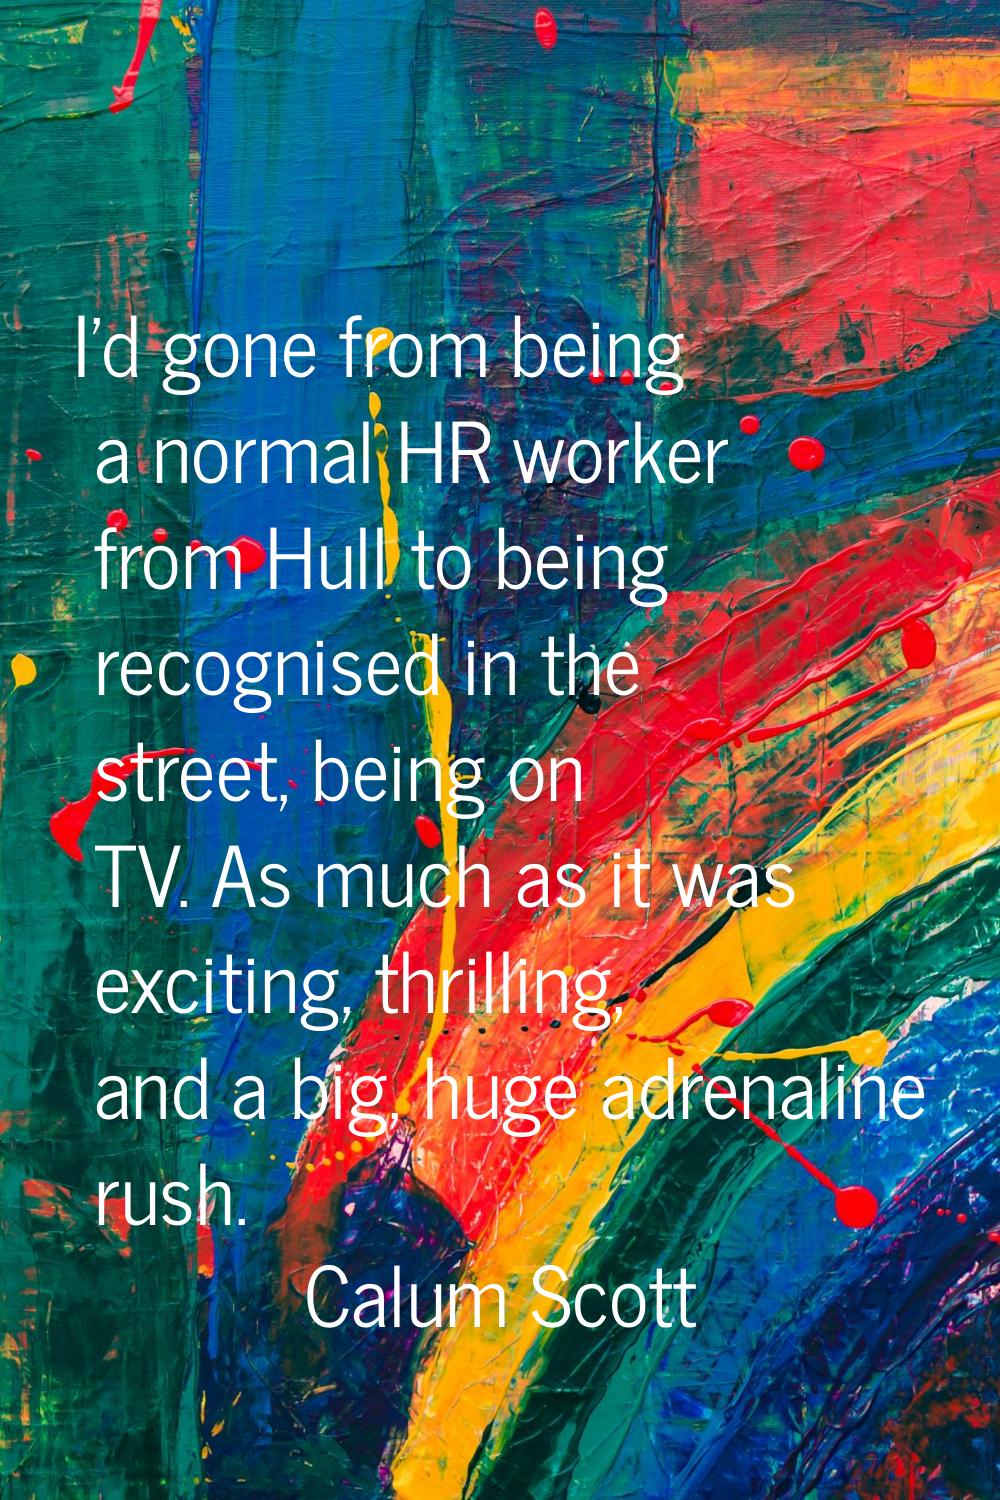 I'd gone from being a normal HR worker from Hull to being recognised in the street, being on TV. As